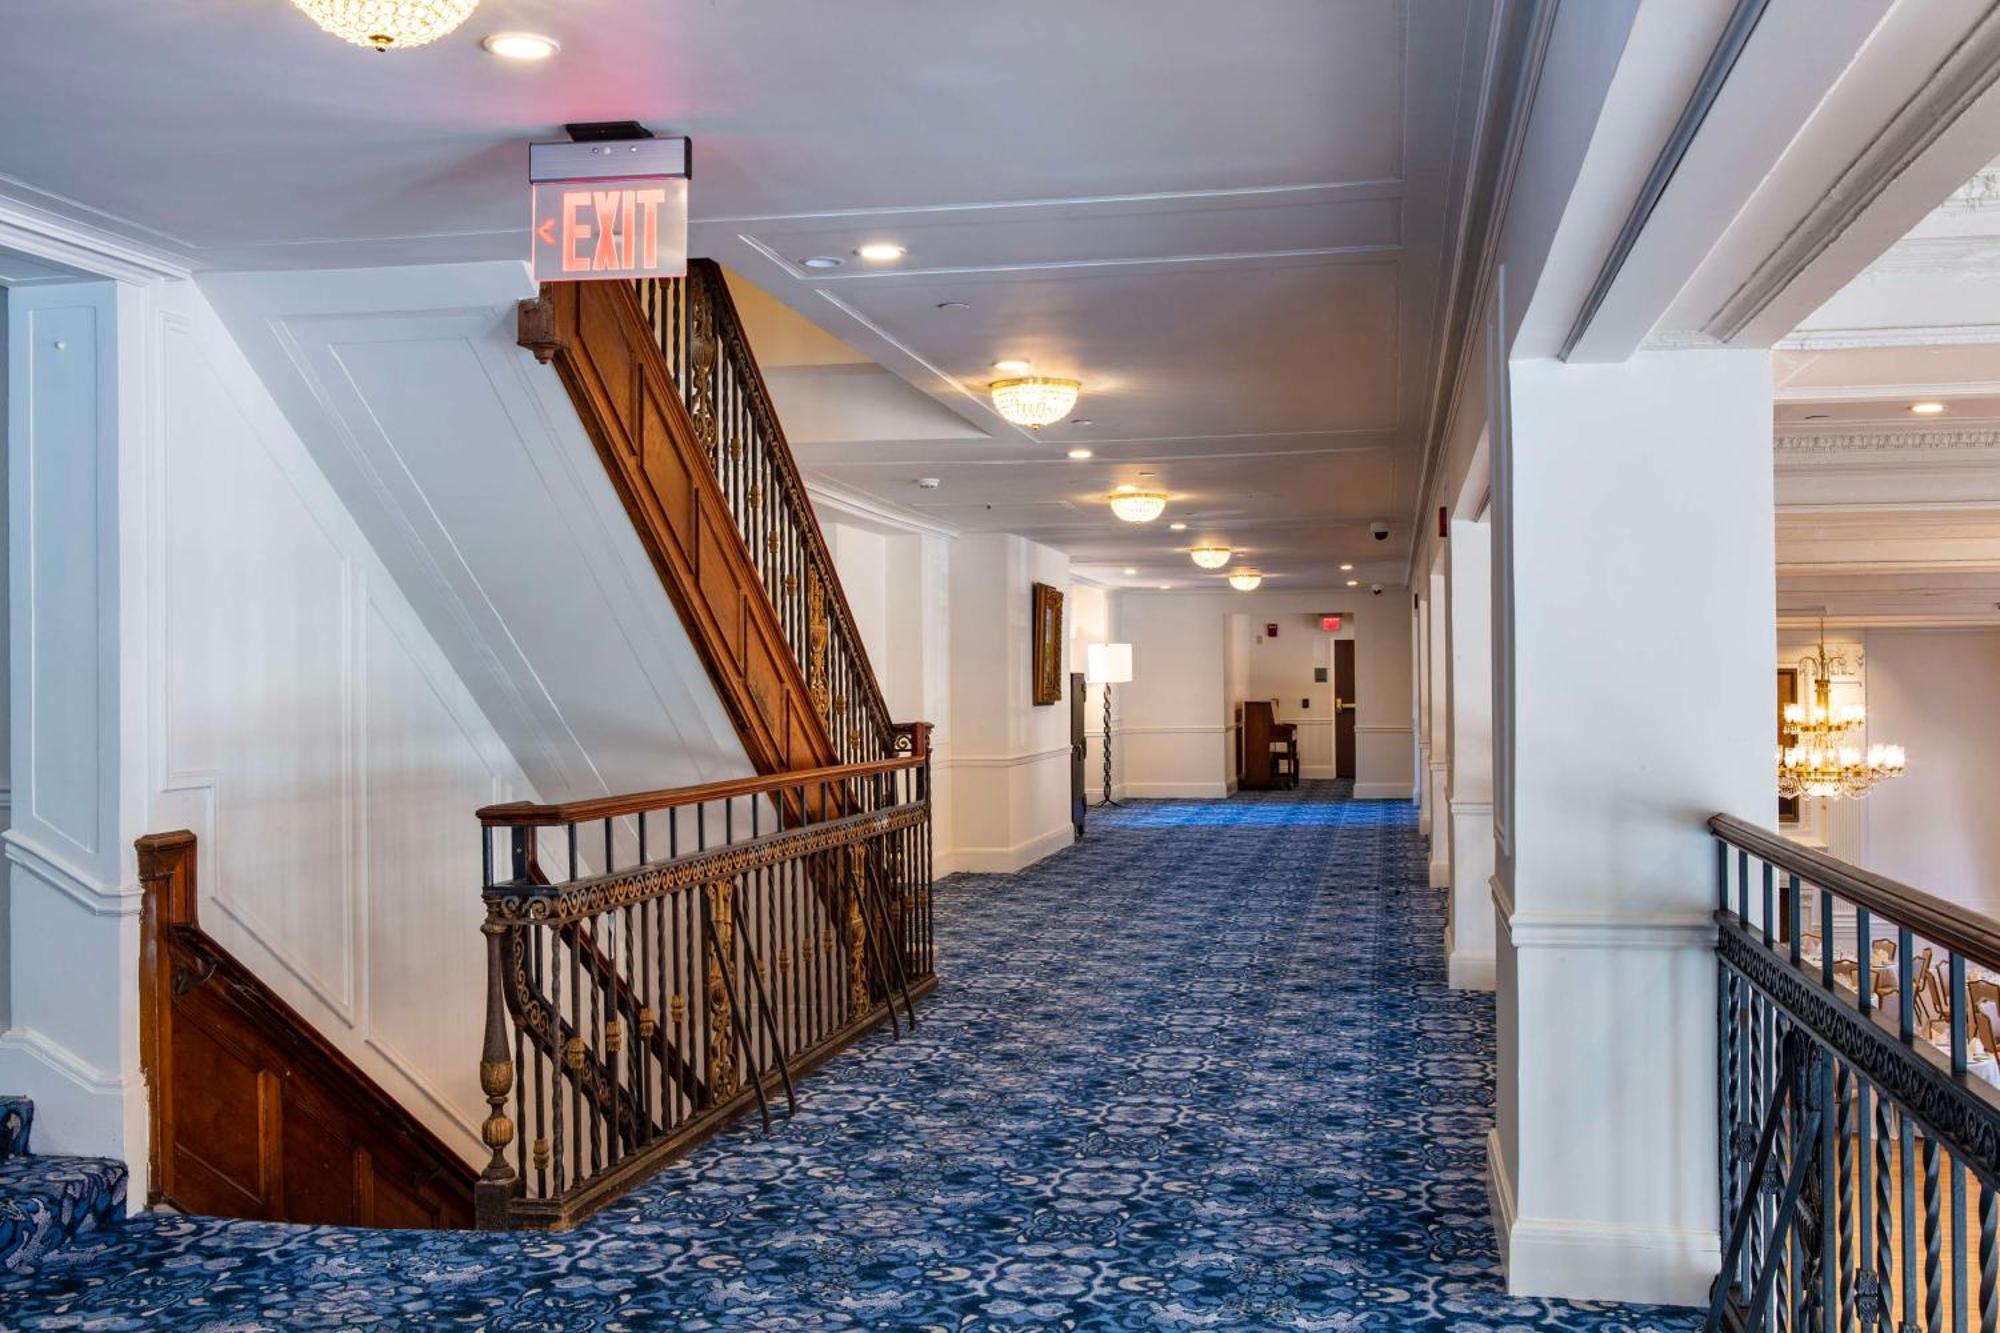 The Yorktowne Hotel, Tapestry Collection By Hilton Bagian luar foto